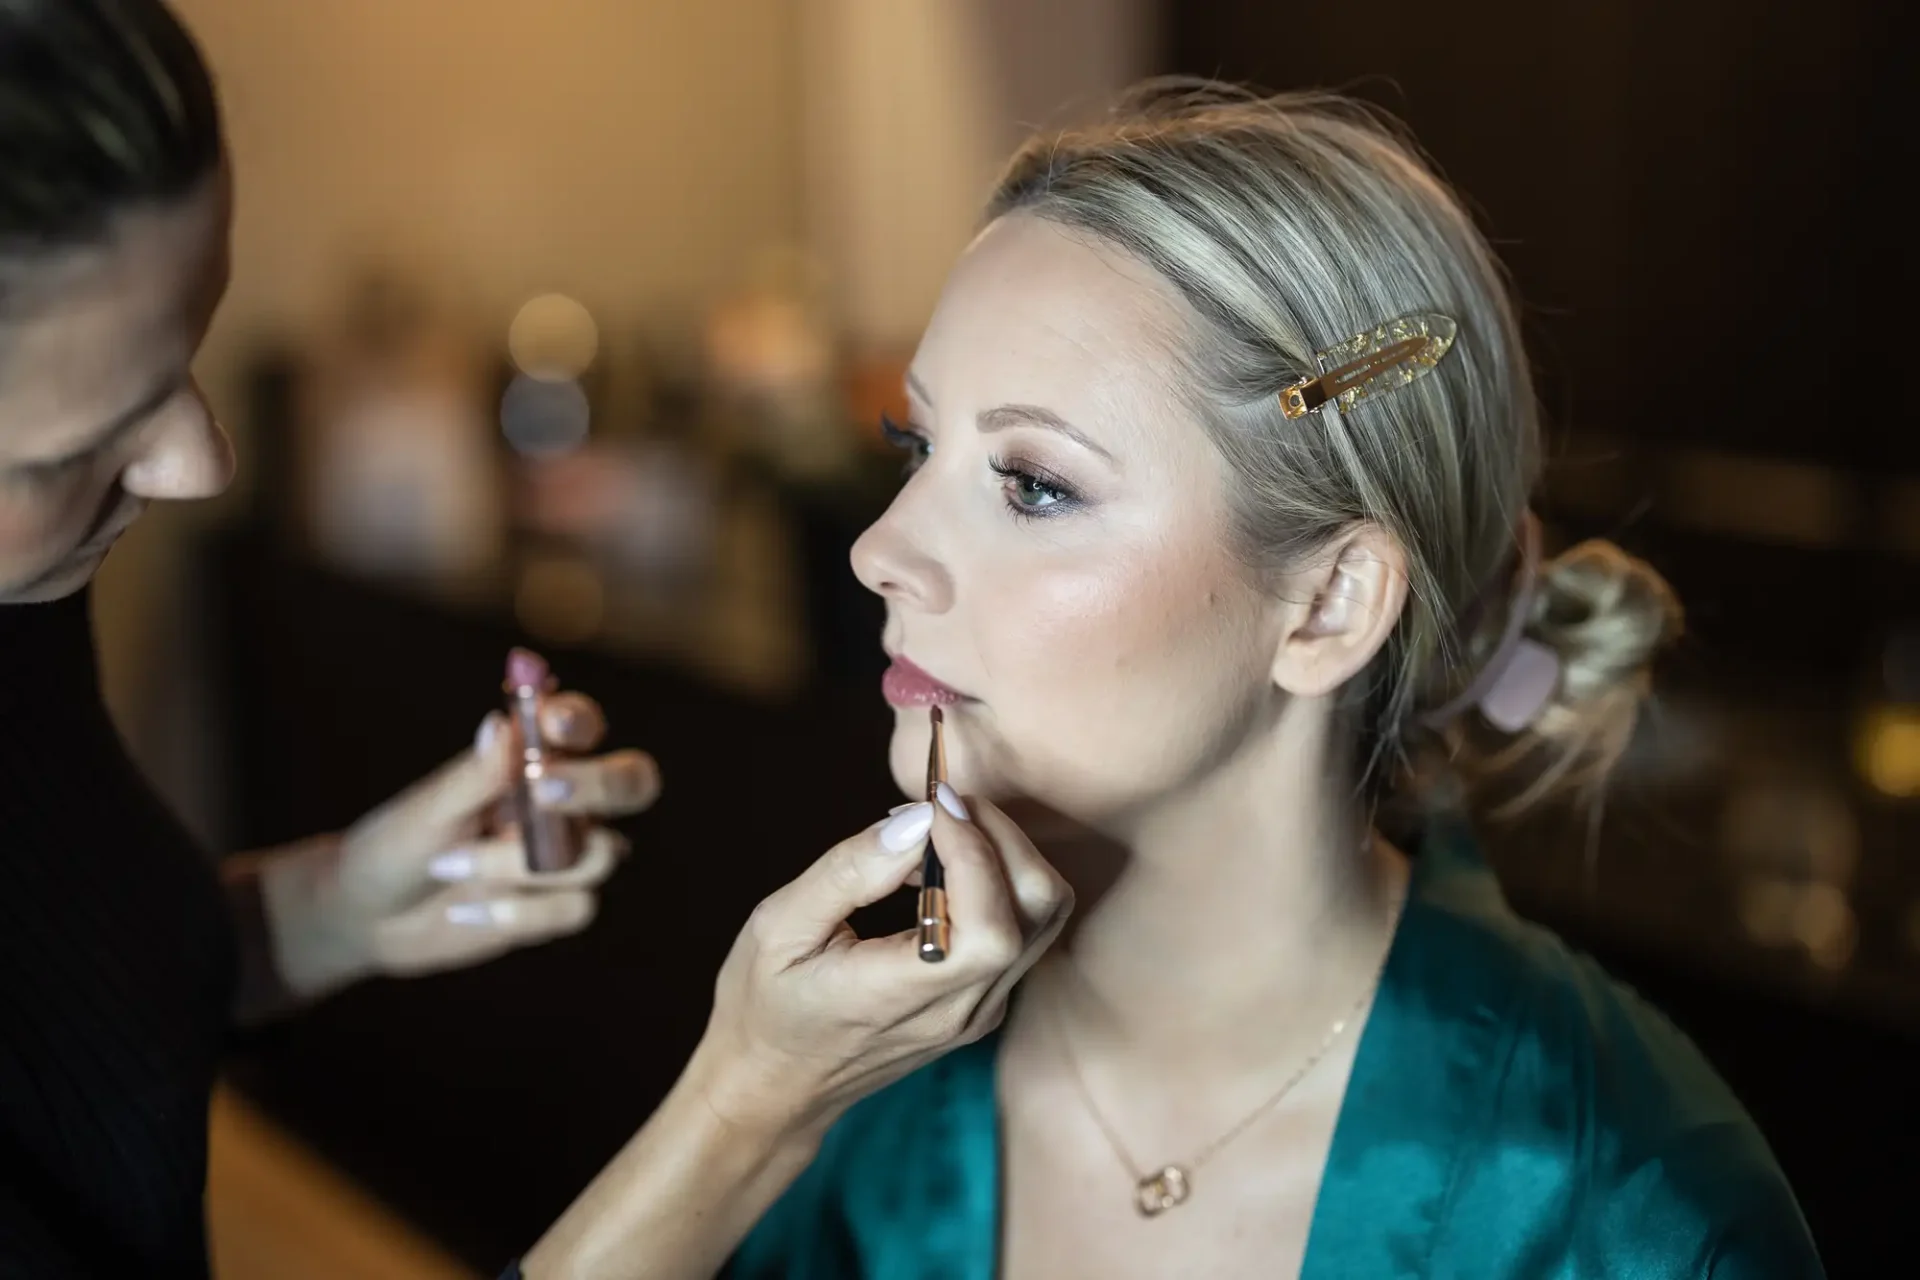 A makeup artist applies lipstick to a blonde woman in a green robe, focusing intently on perfecting her makeup.